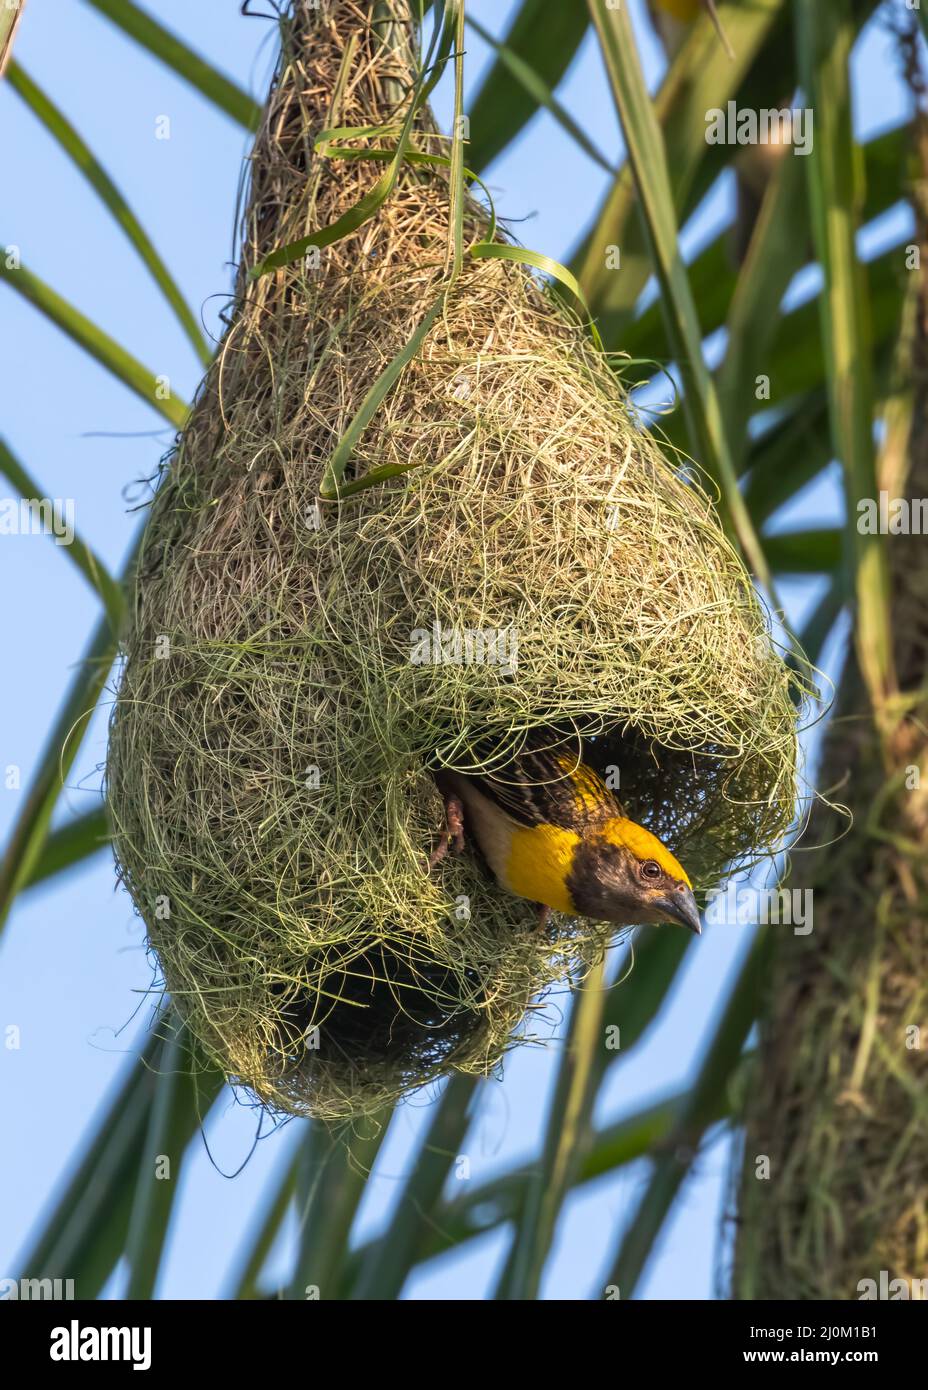 Baya weaver bird in its nest hanging from the tree branch in the wild Stock Photo